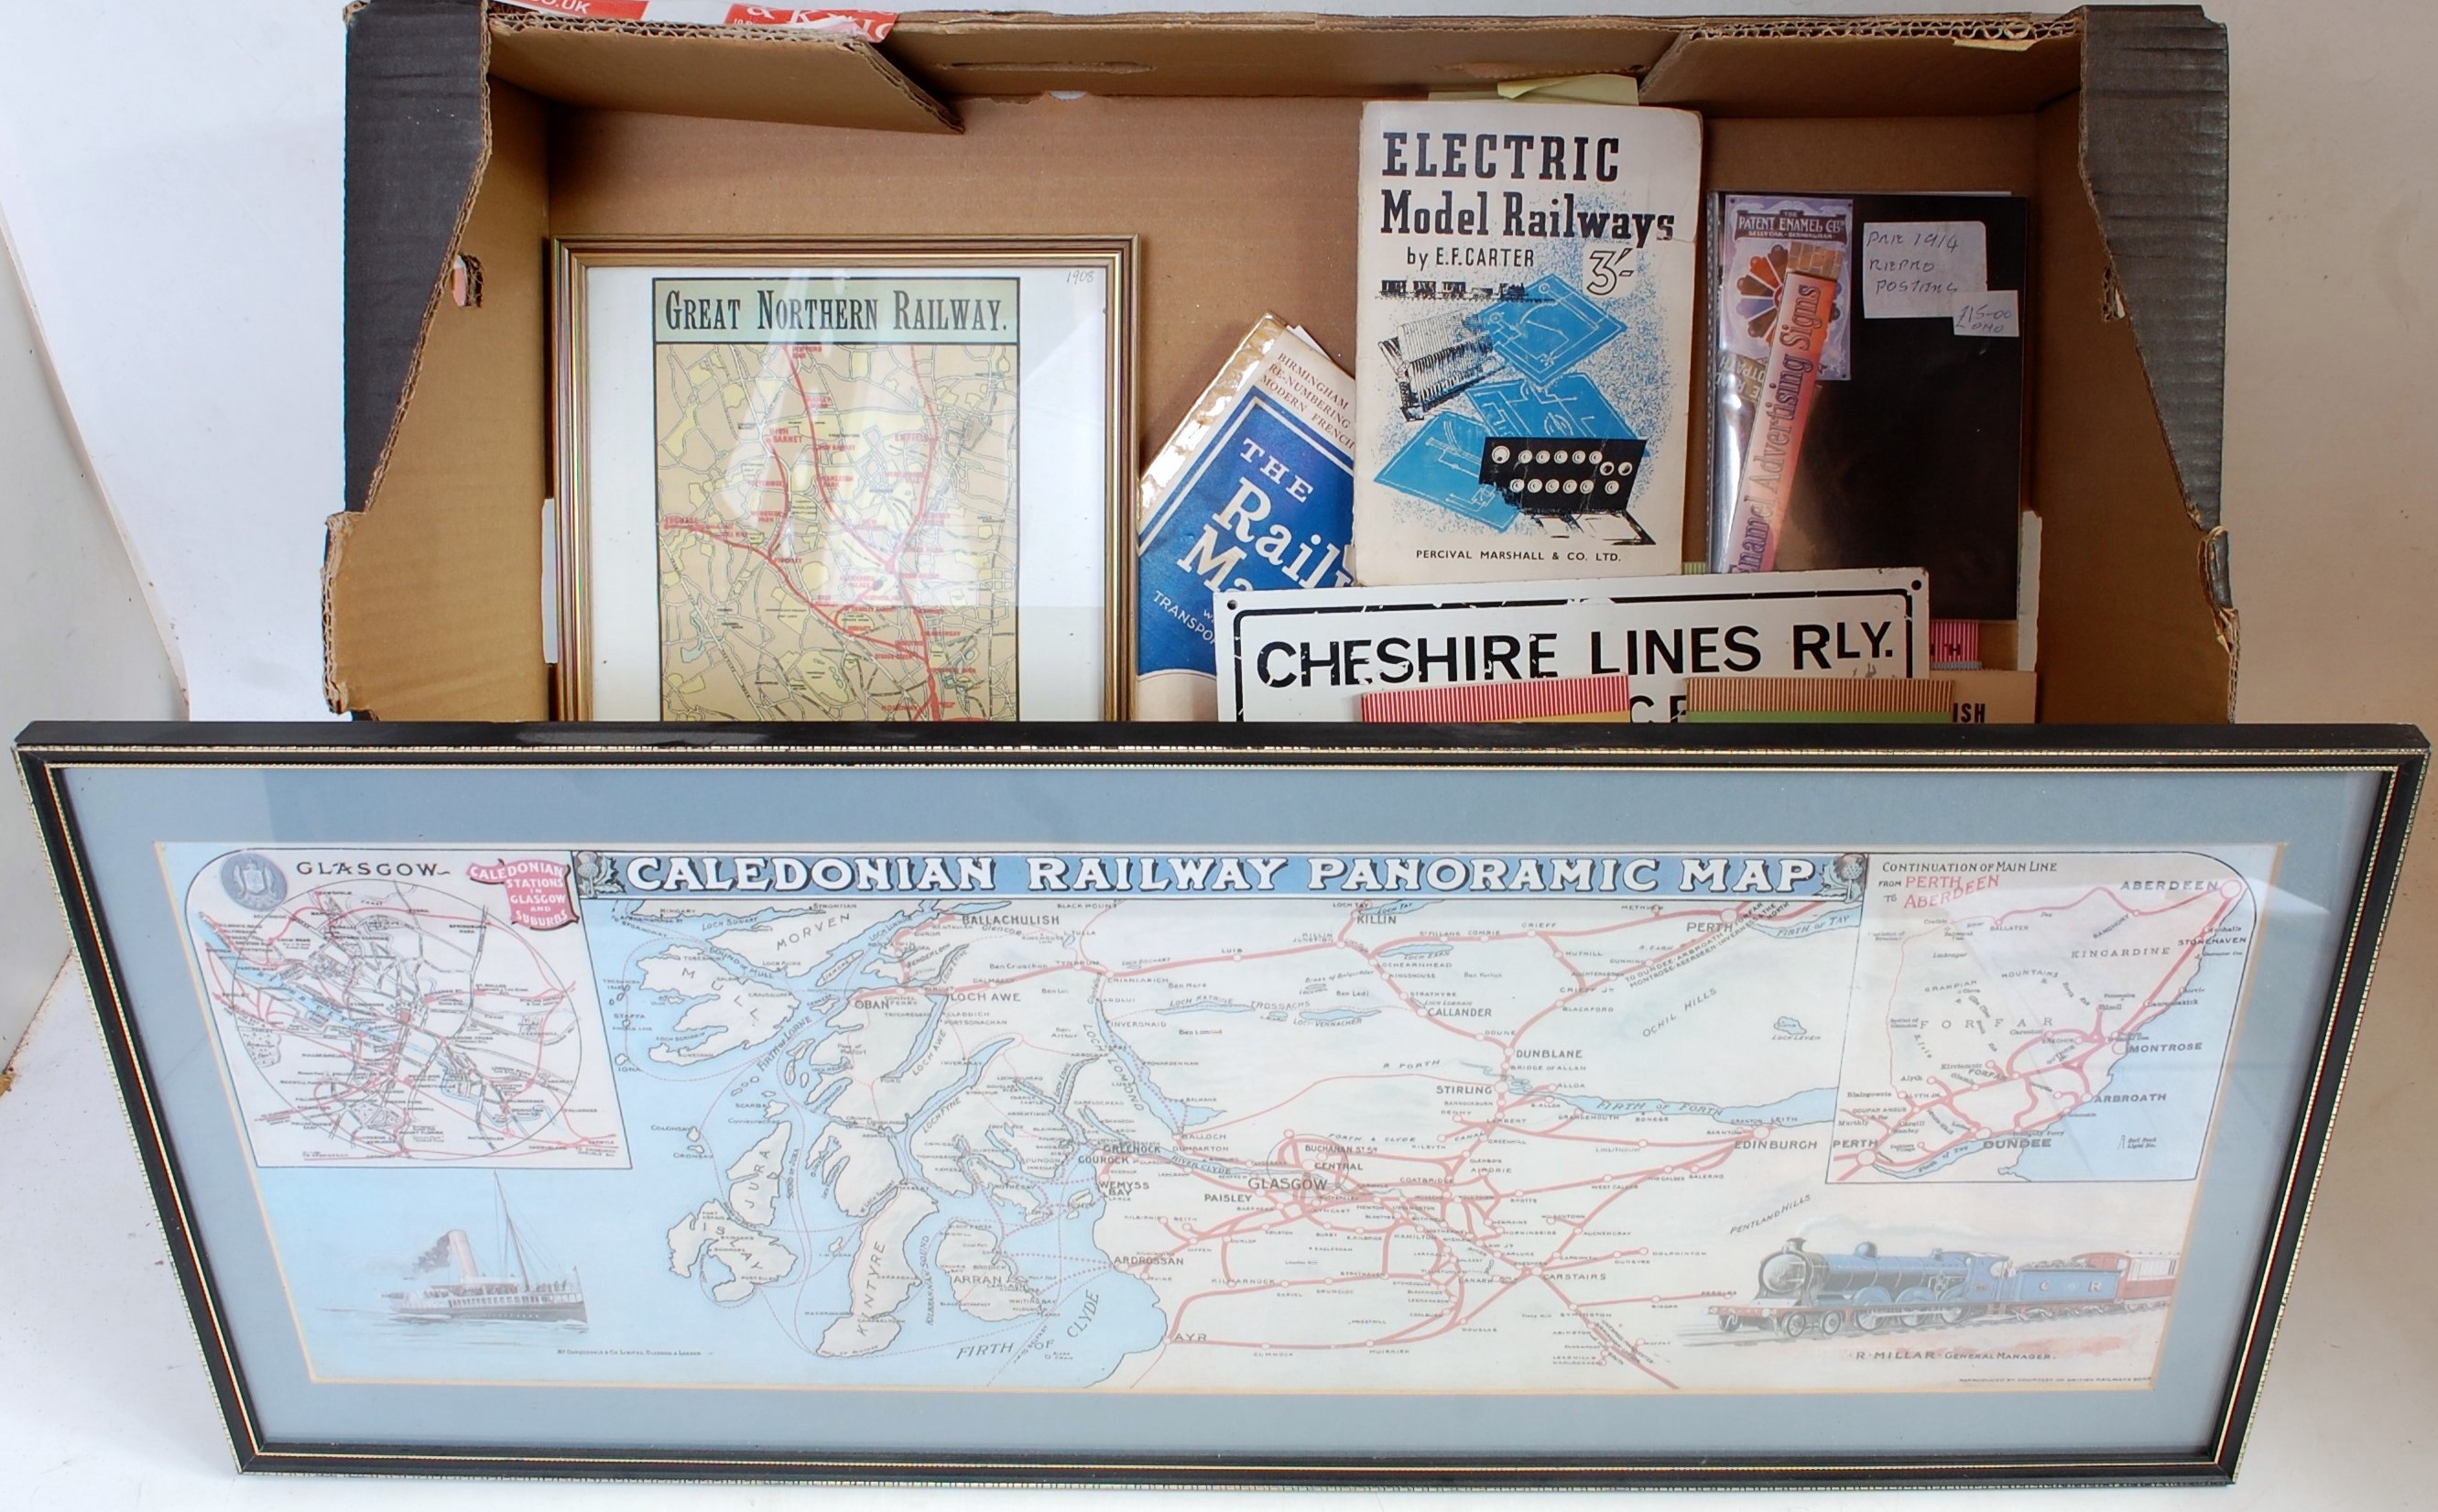 A collection of reproduction and original railway interest booklets, leaflets and associated